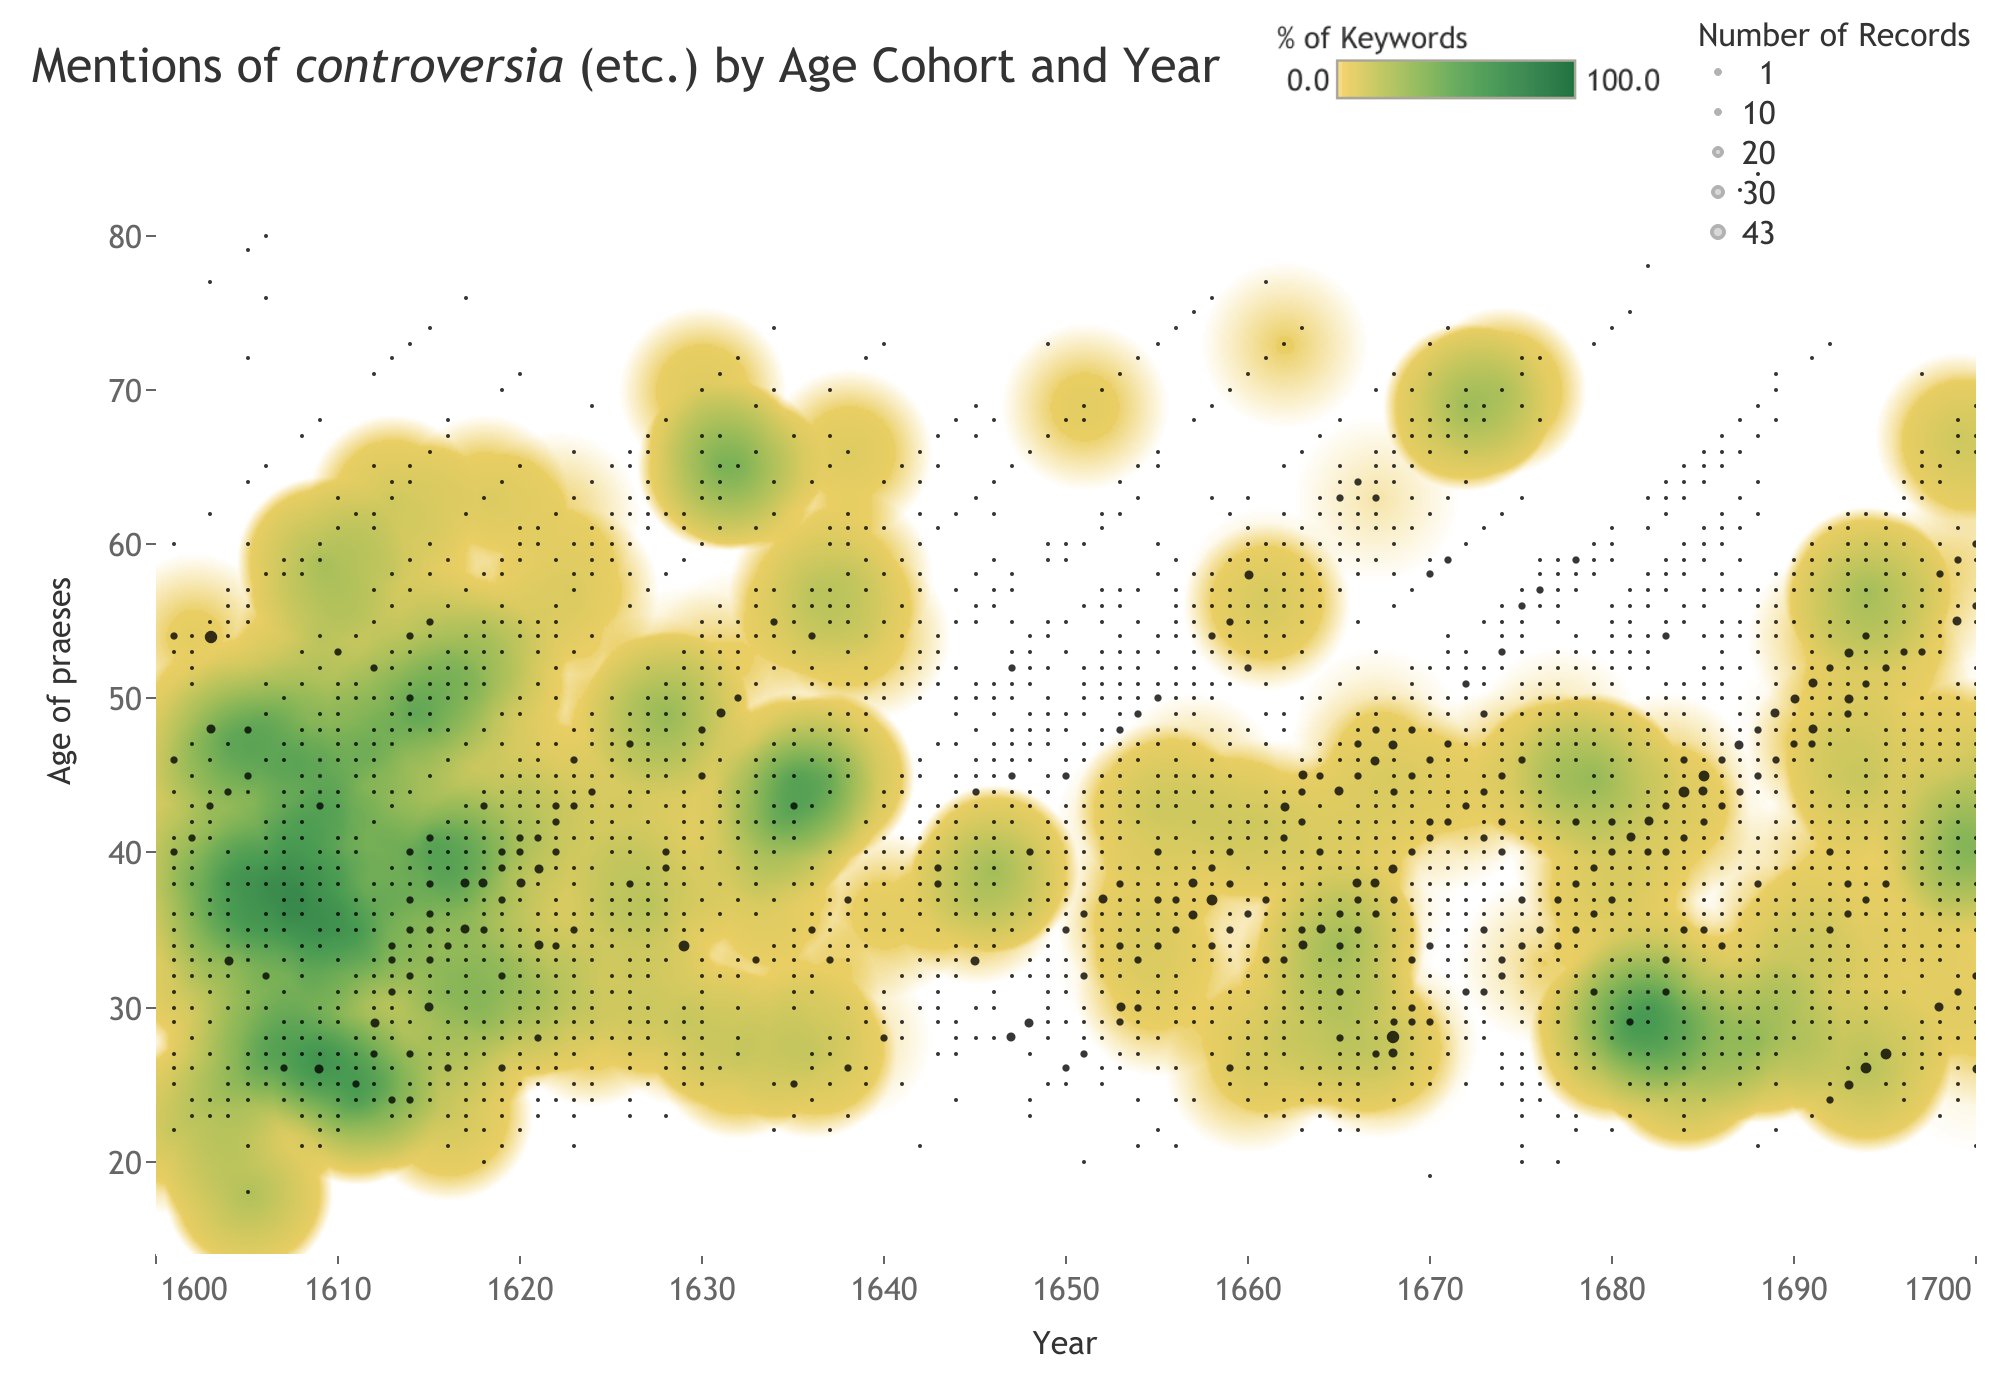 A dot density graph entitled "Mentions of controversia by Age Cohort and Year" with year on the x-axis and the age of praeses on the y-axis. Green, yellow and black dots on a white background.